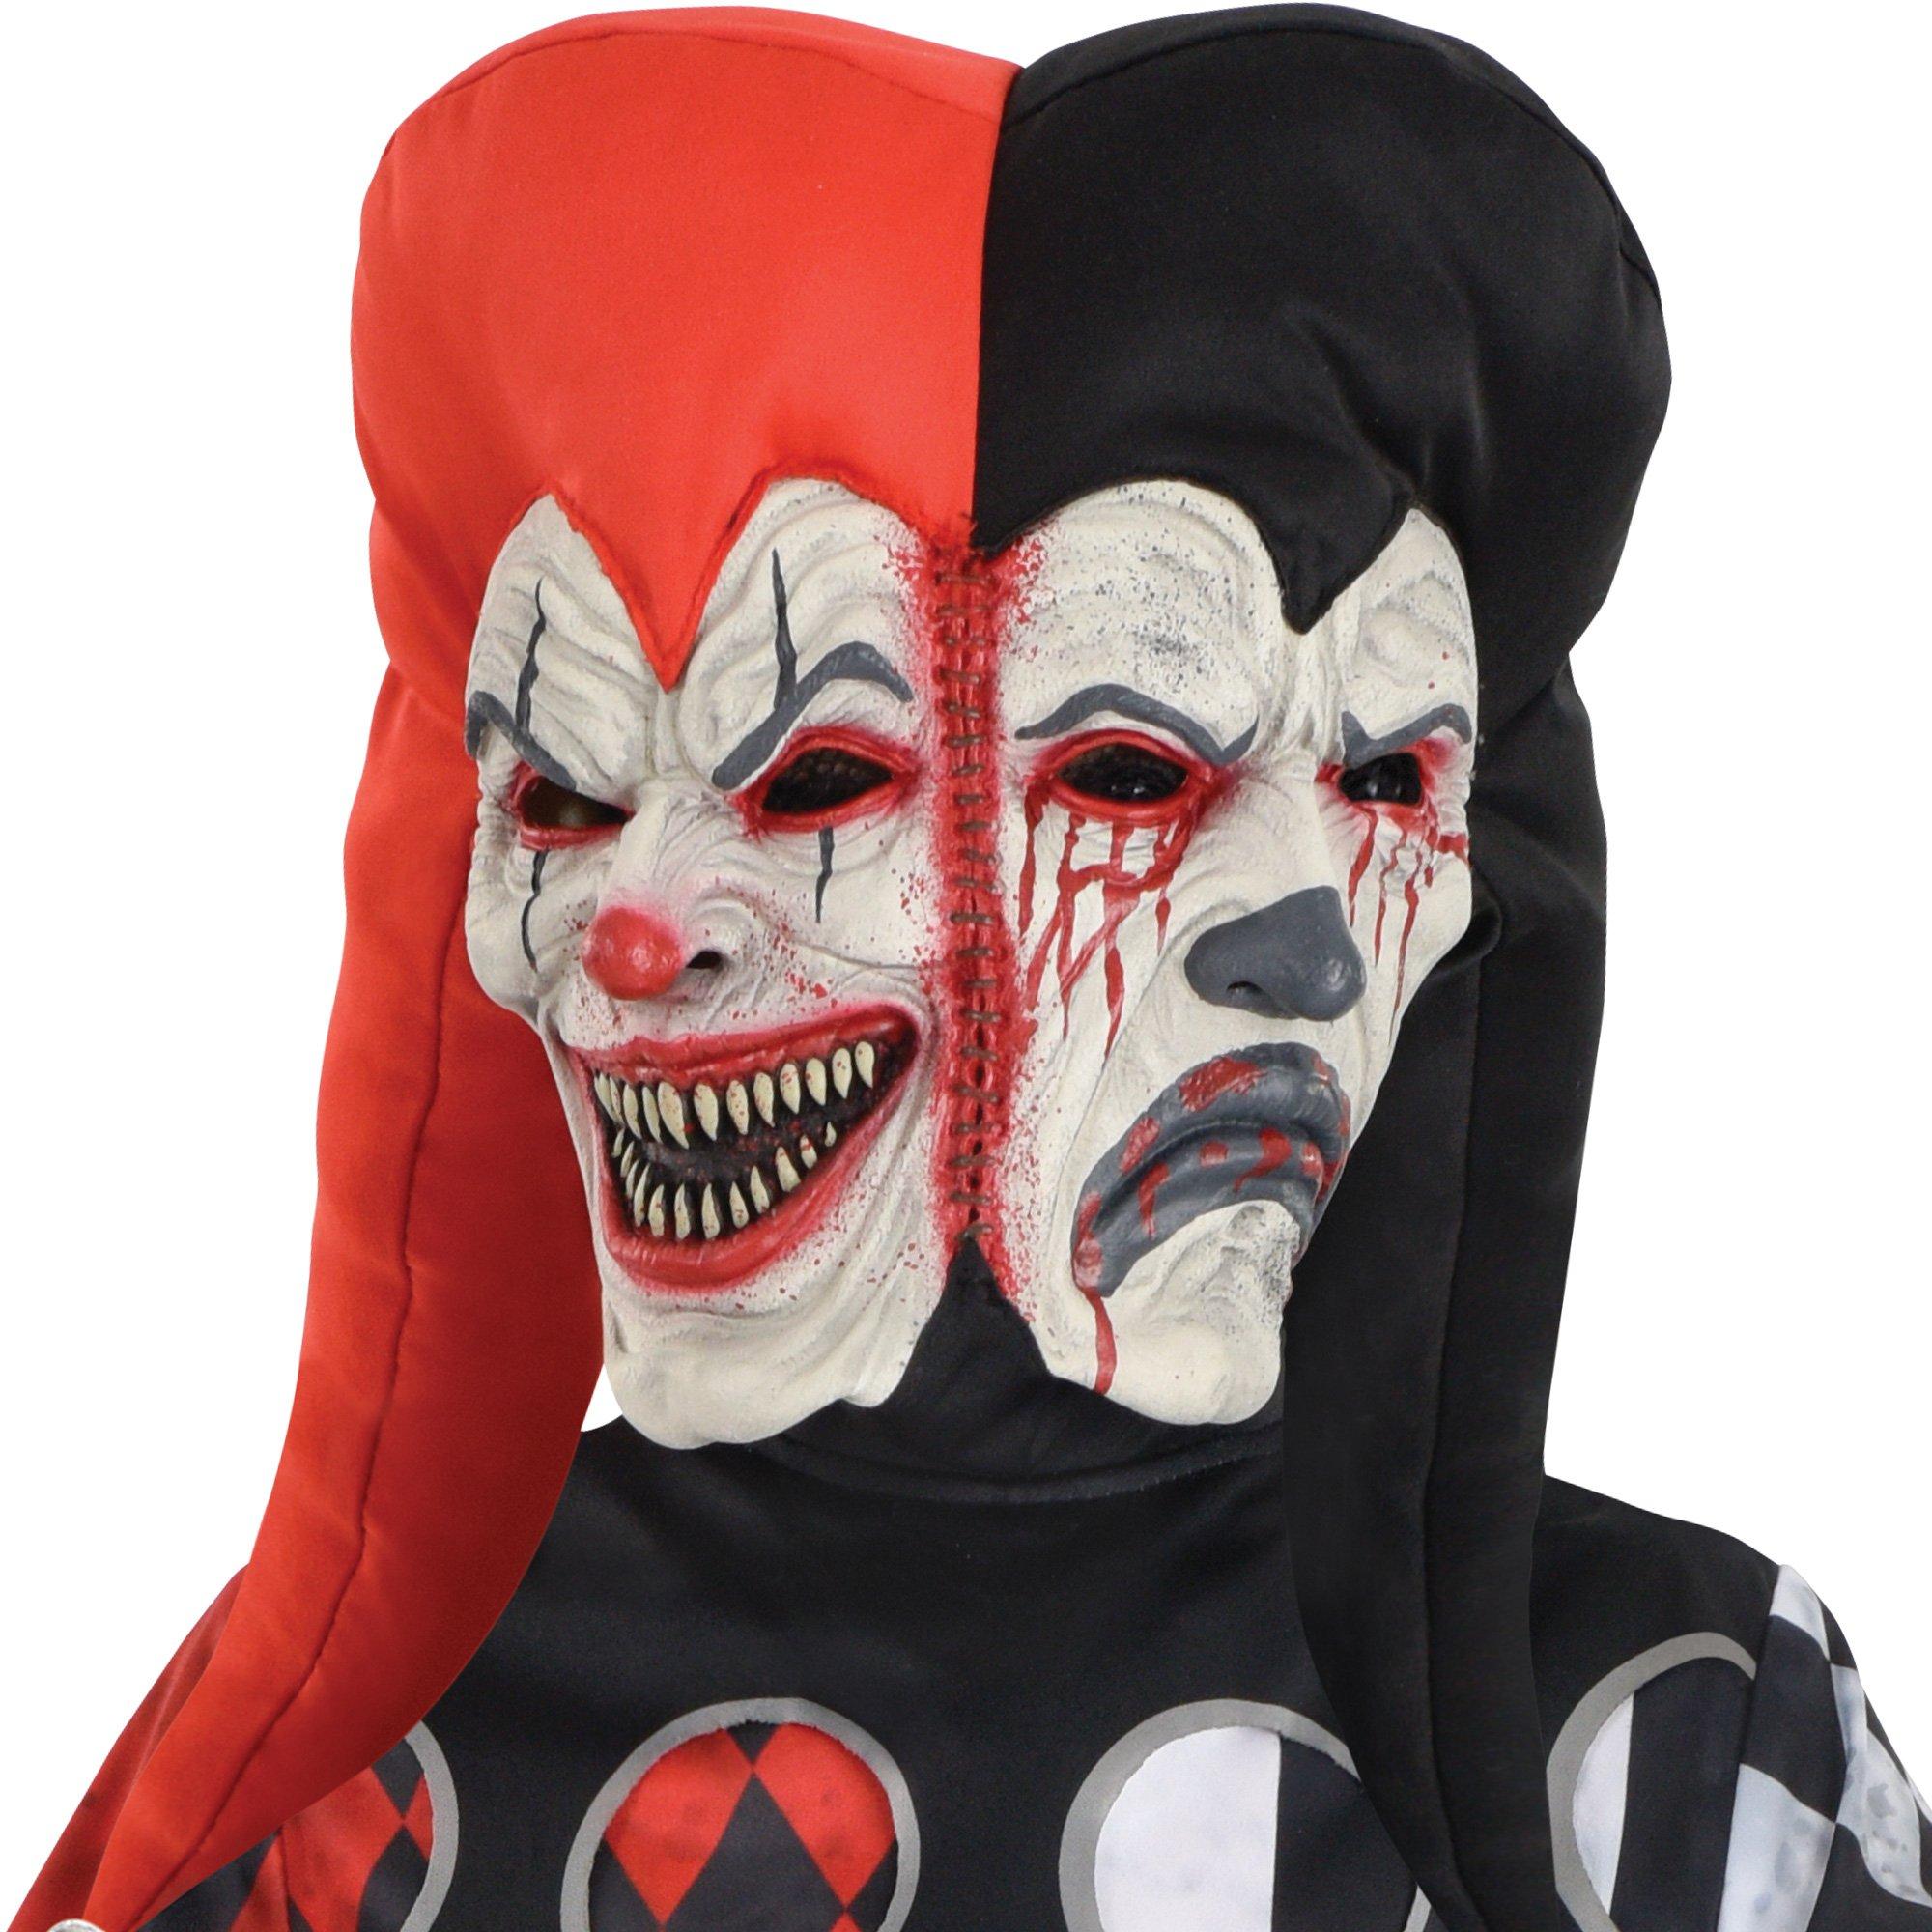 Kids' Two-Faced Jester Costume